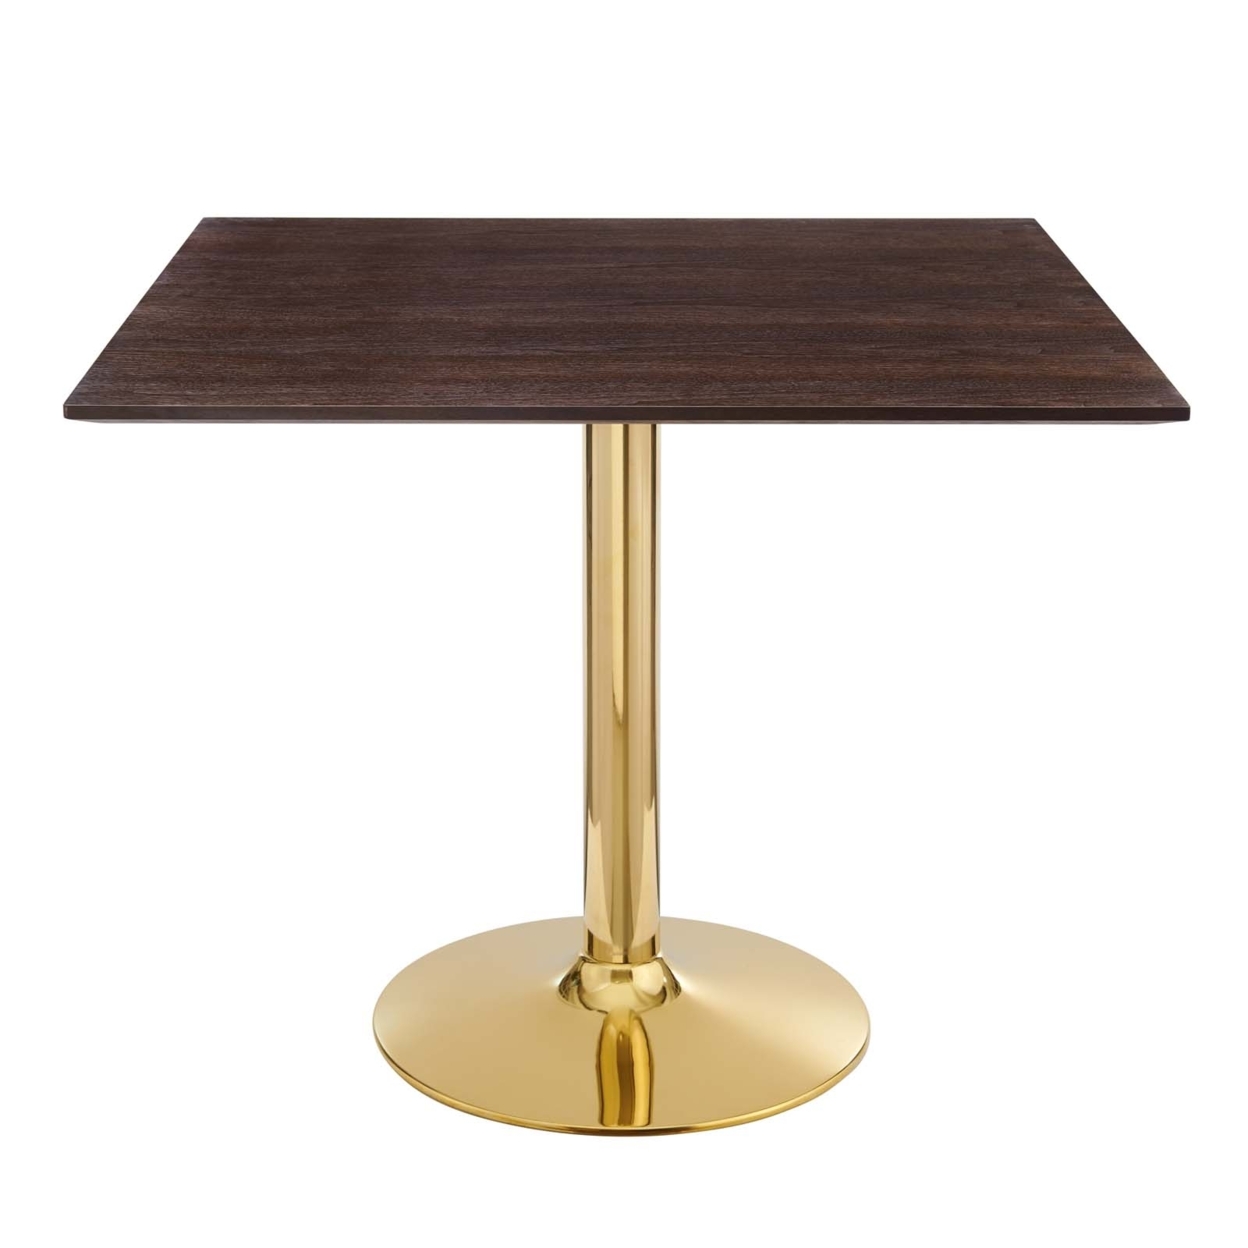 Verne 35 Square Dining Table, Gold Cherry Walnut